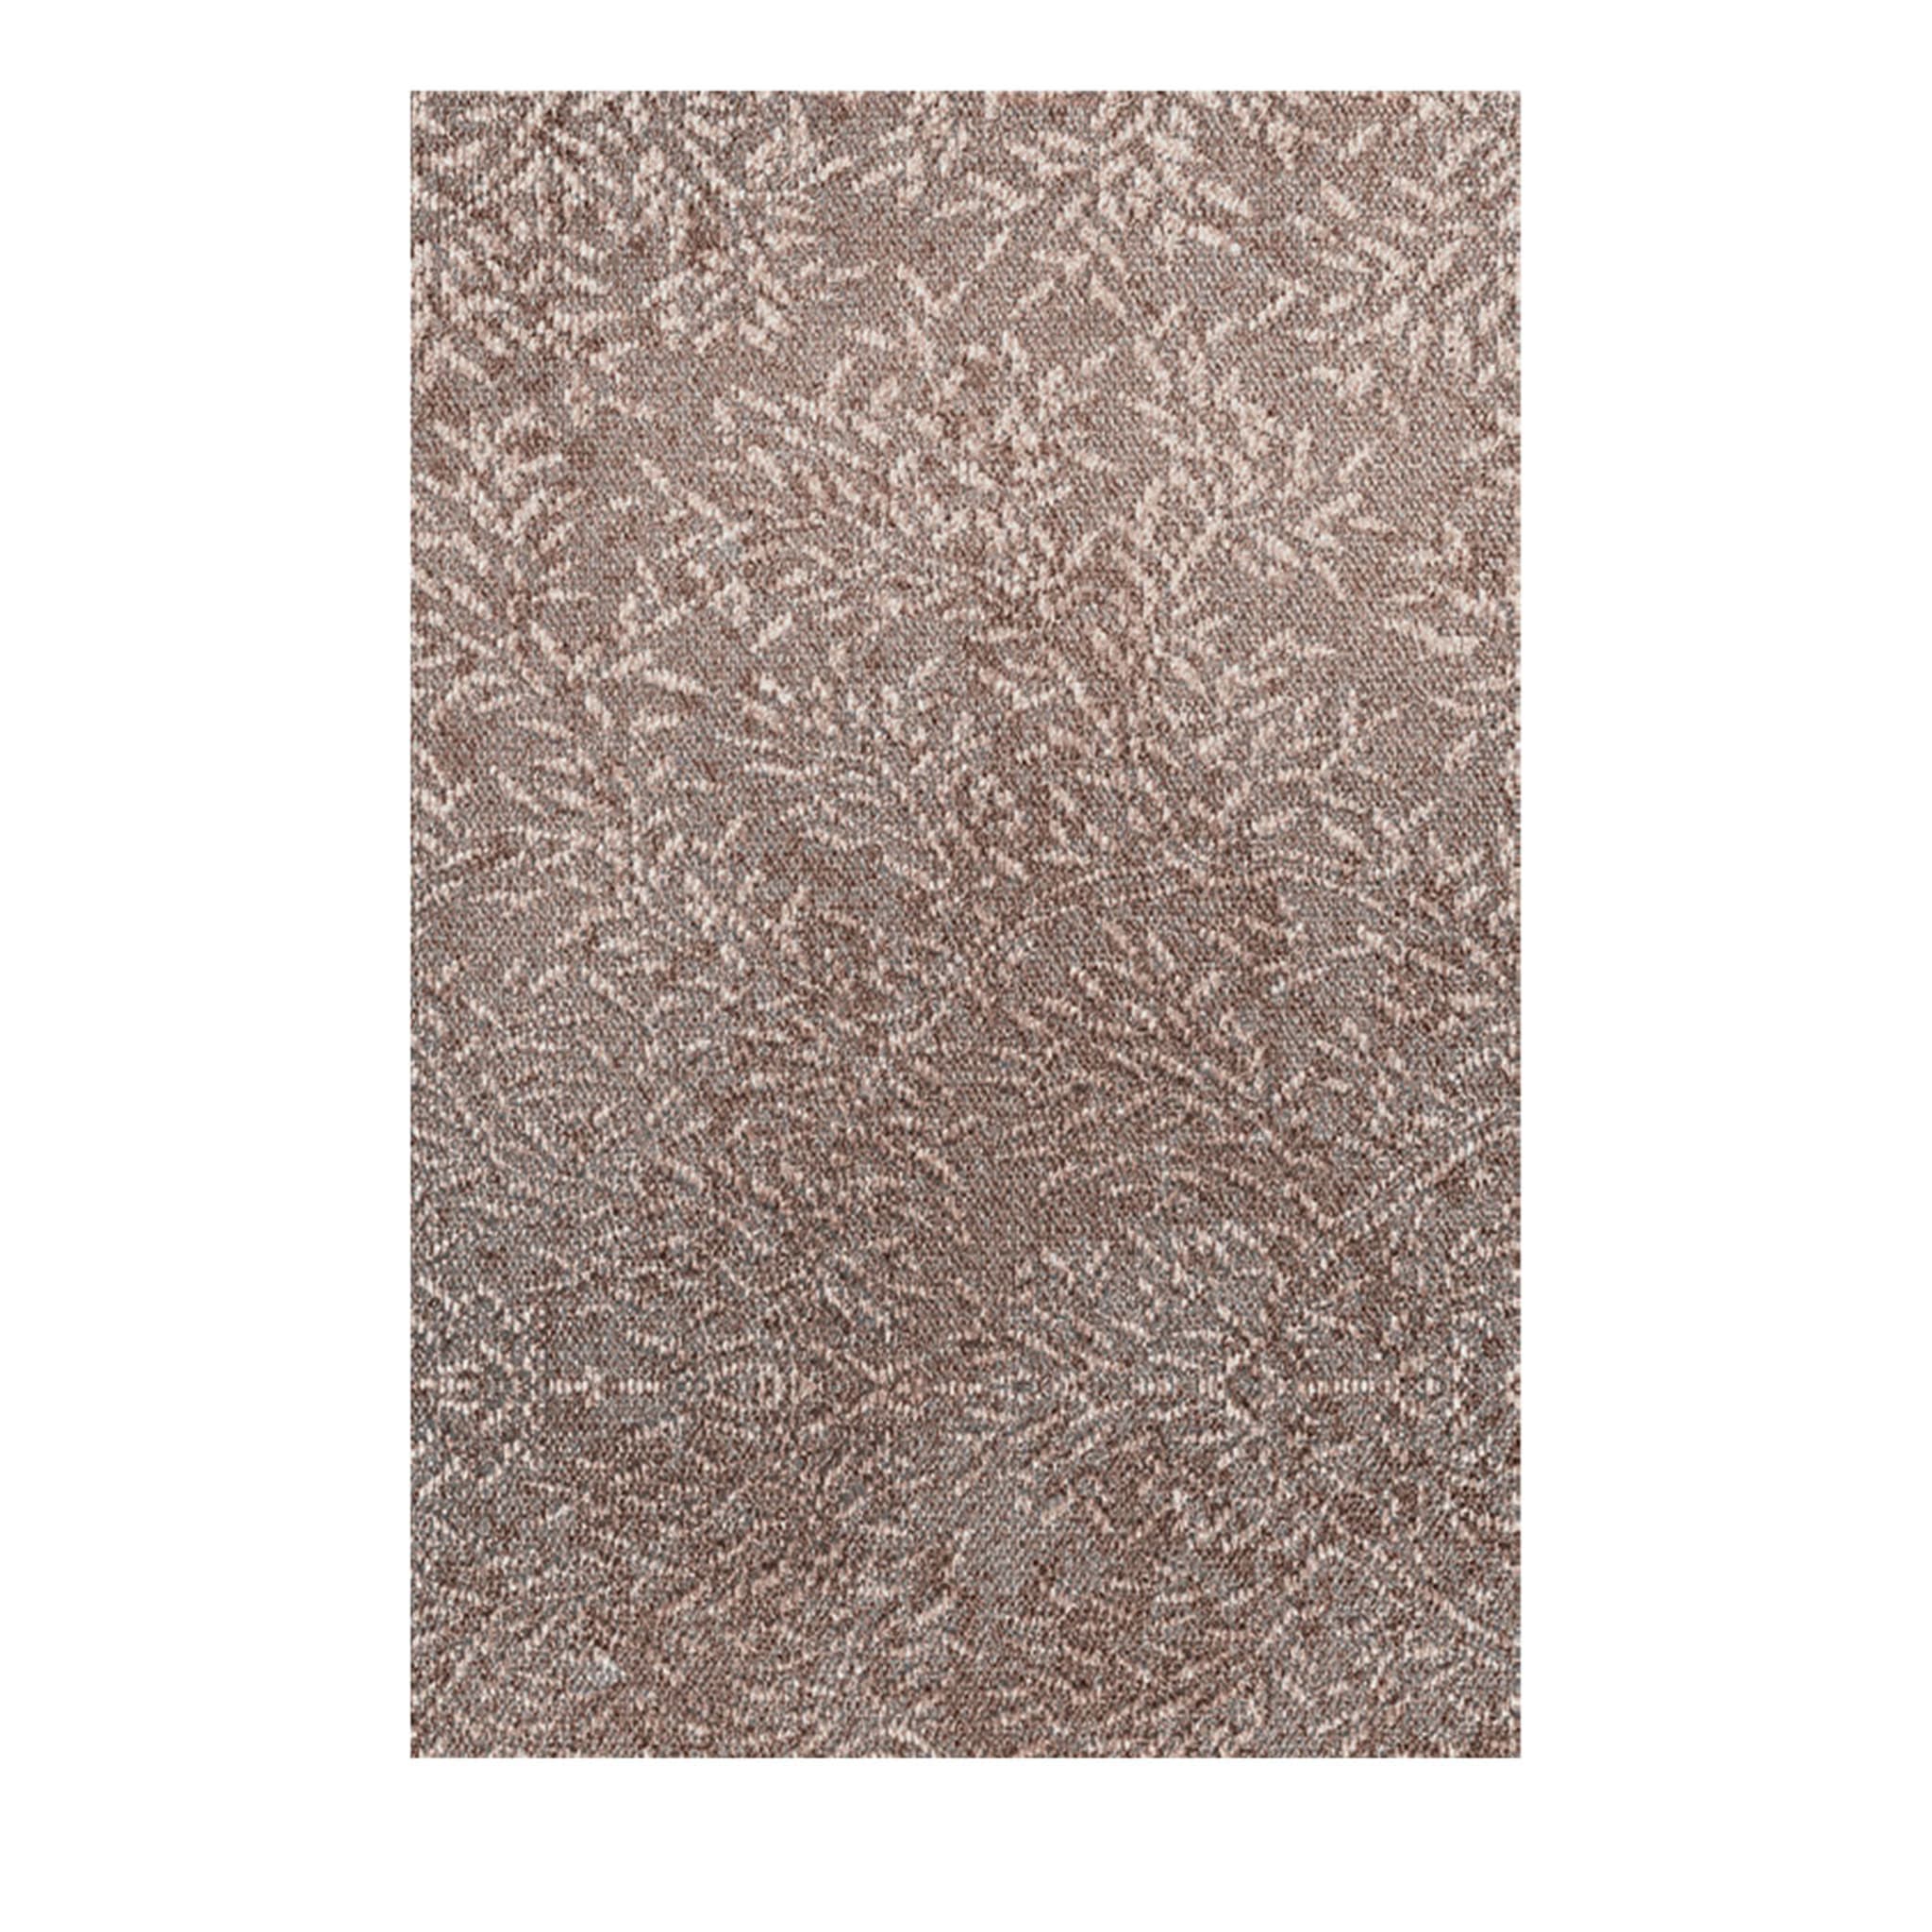 25 Copper Flowery Point Outdoor Wallpaper - Main view